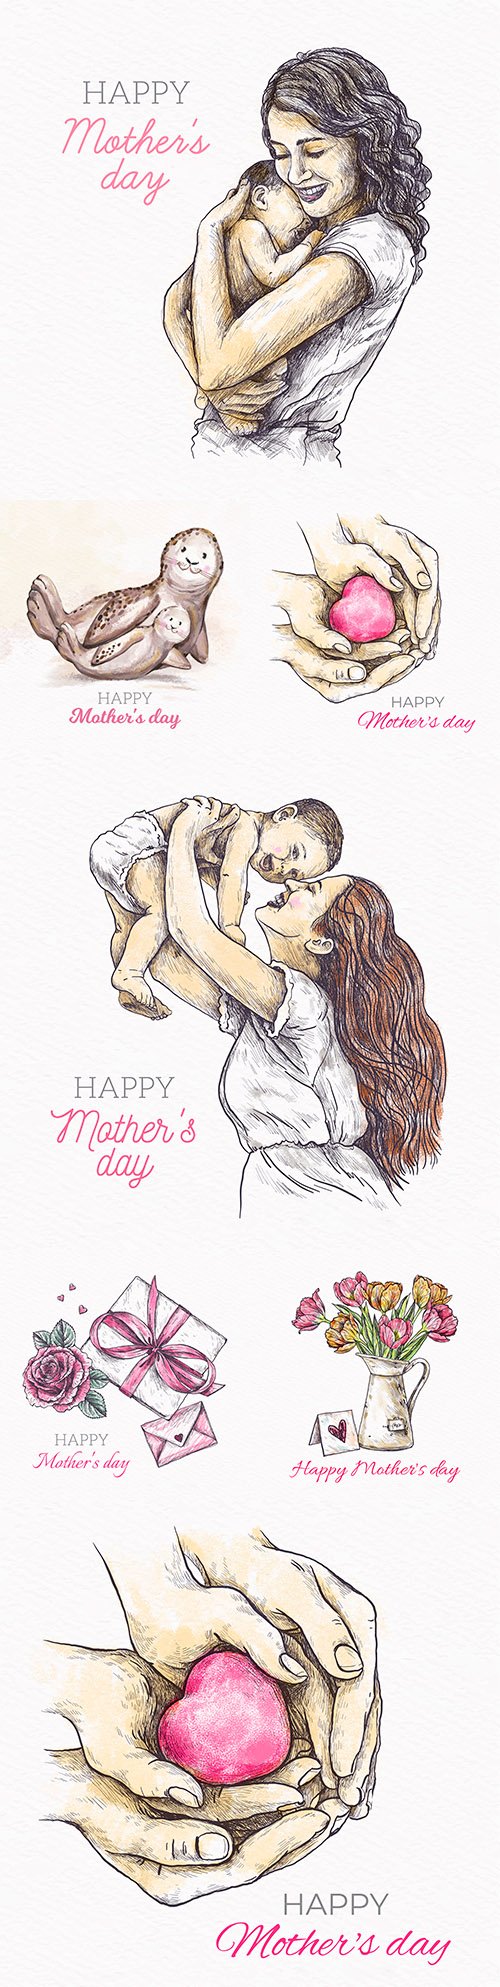 Mother 's Day design with flowers watercolor illustrations